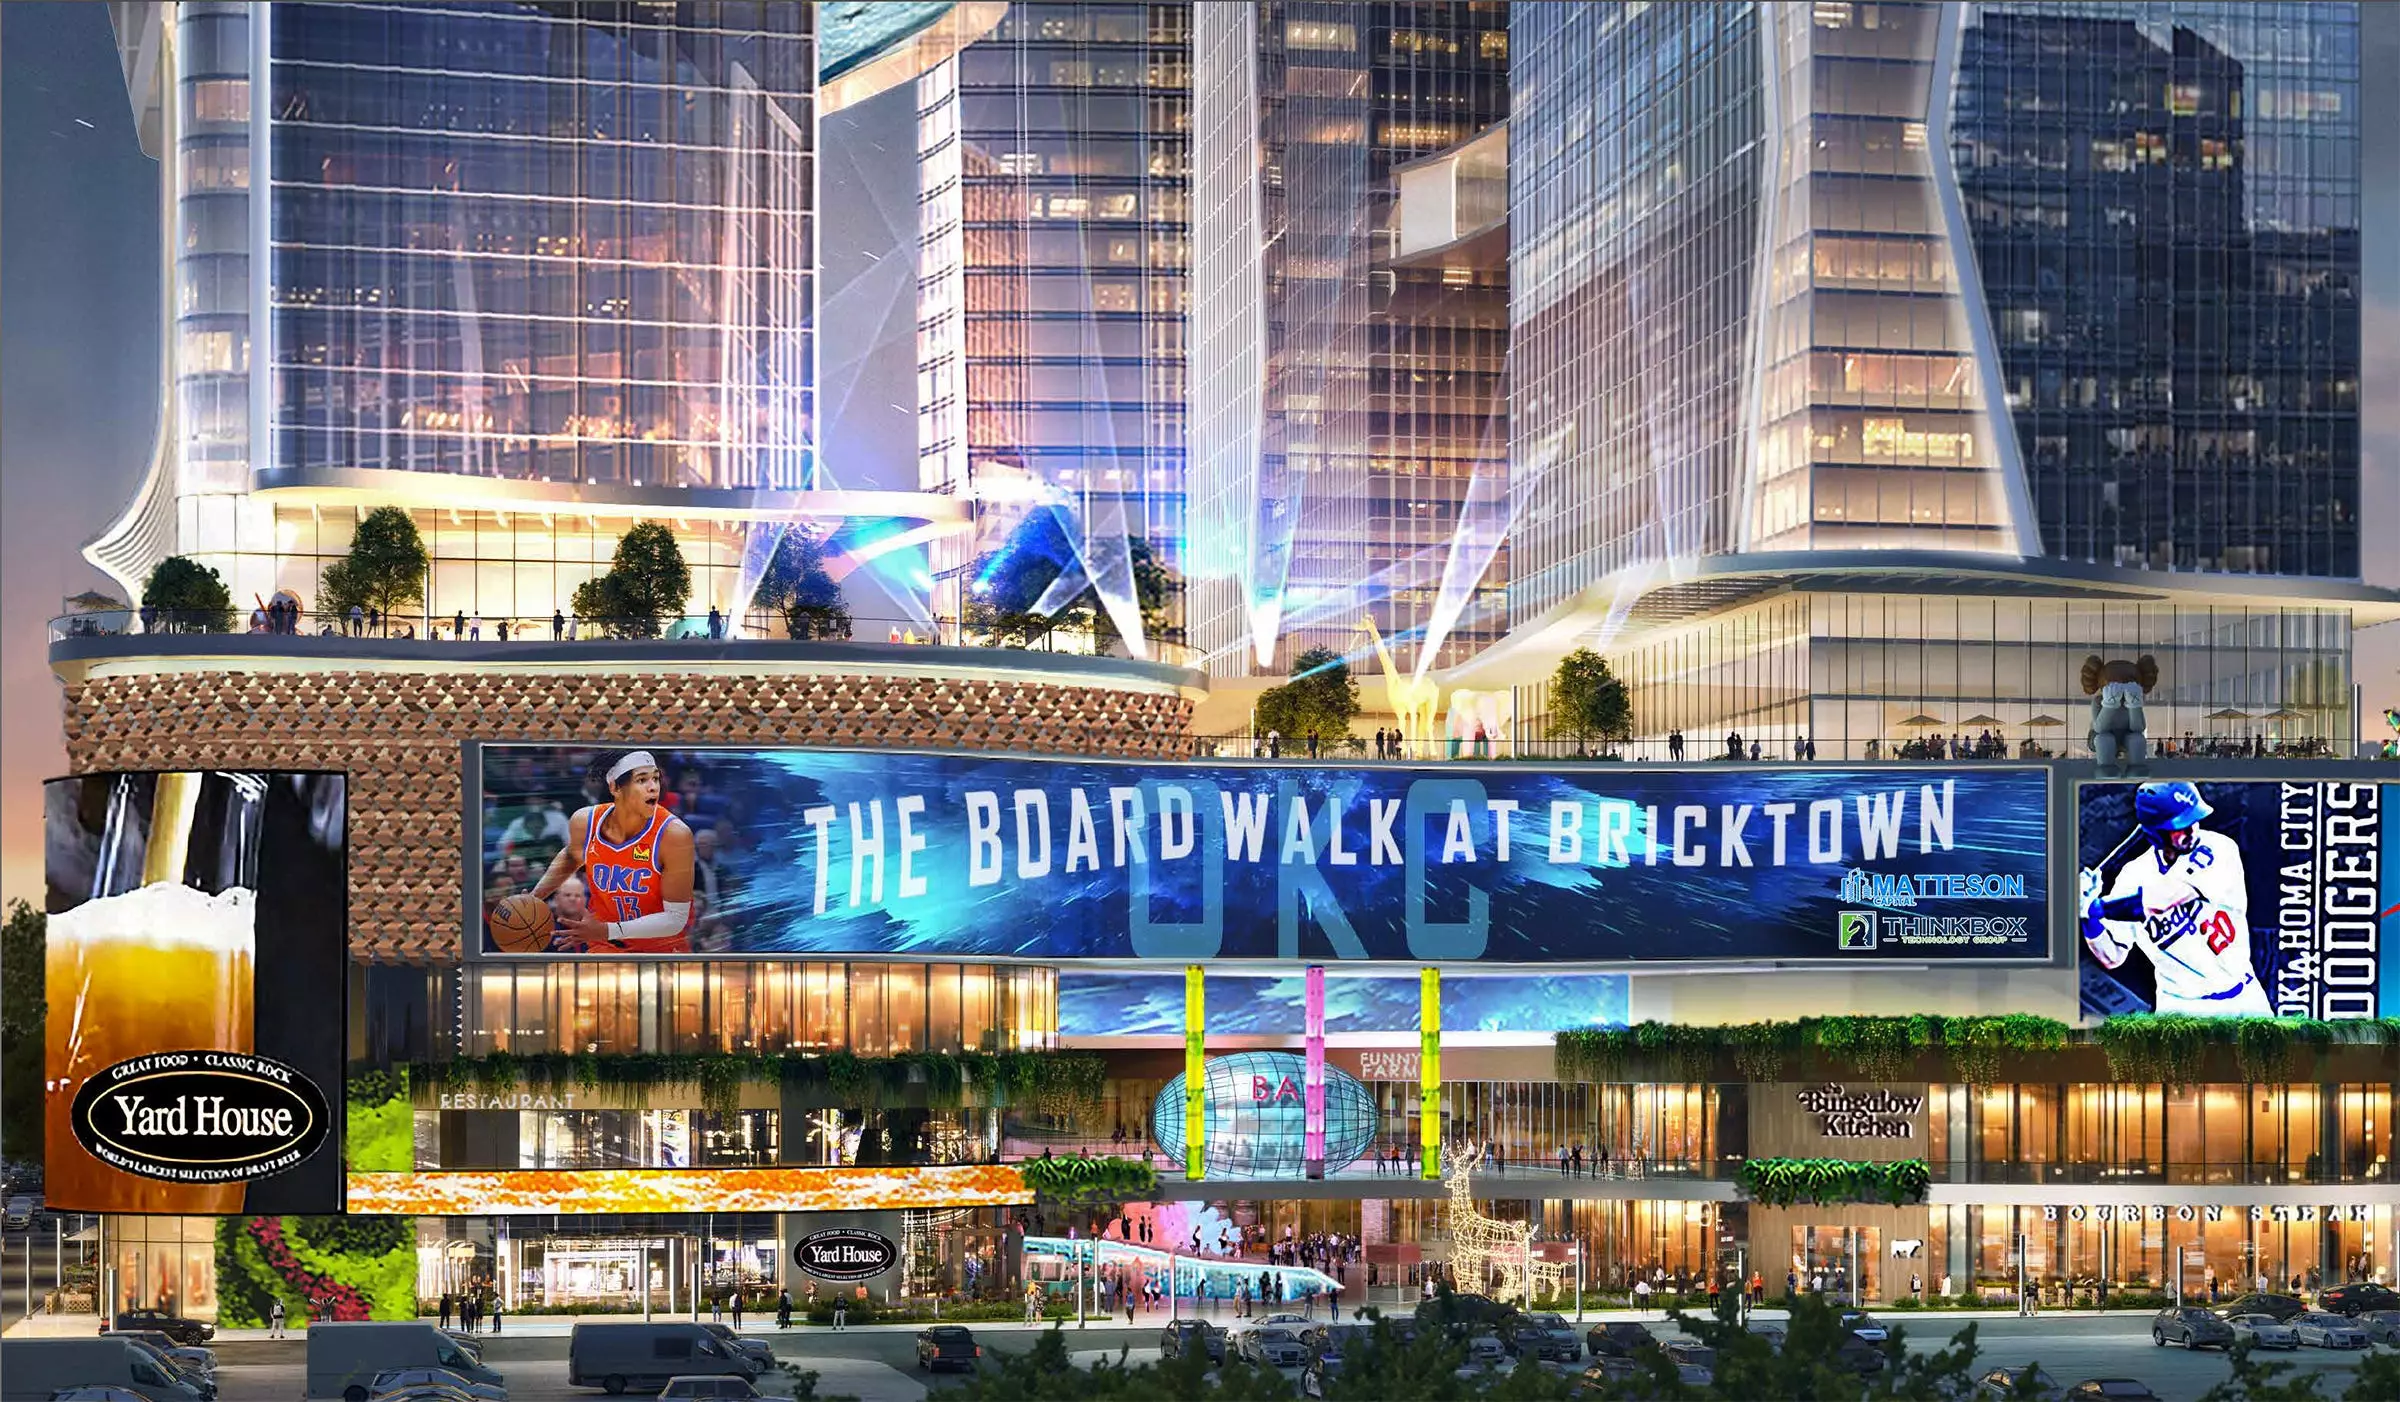 A rendering of the proposed Boardwalk at Bricktown.